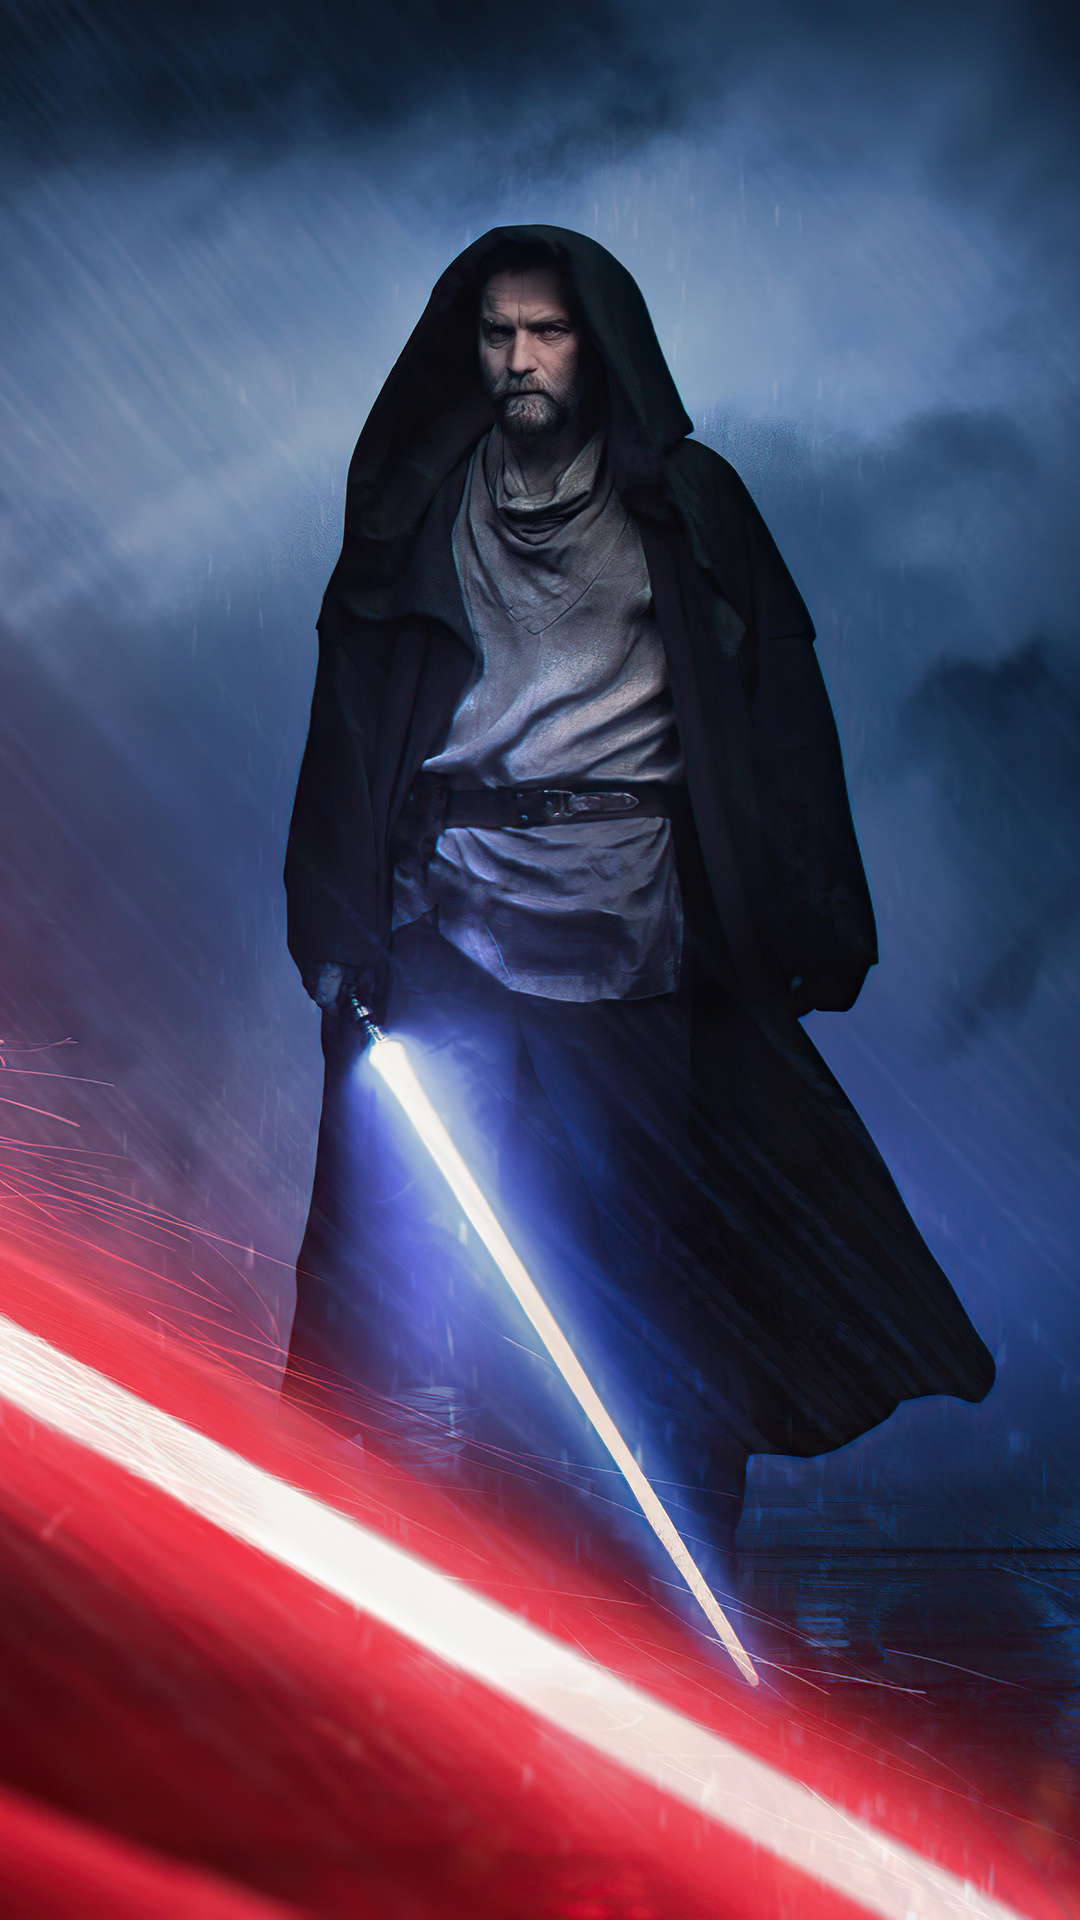 Made an iPhone wallpaper out of this ObiWan Kenobi 2022 poster since I  couldnt find one online  riphonewallpapers